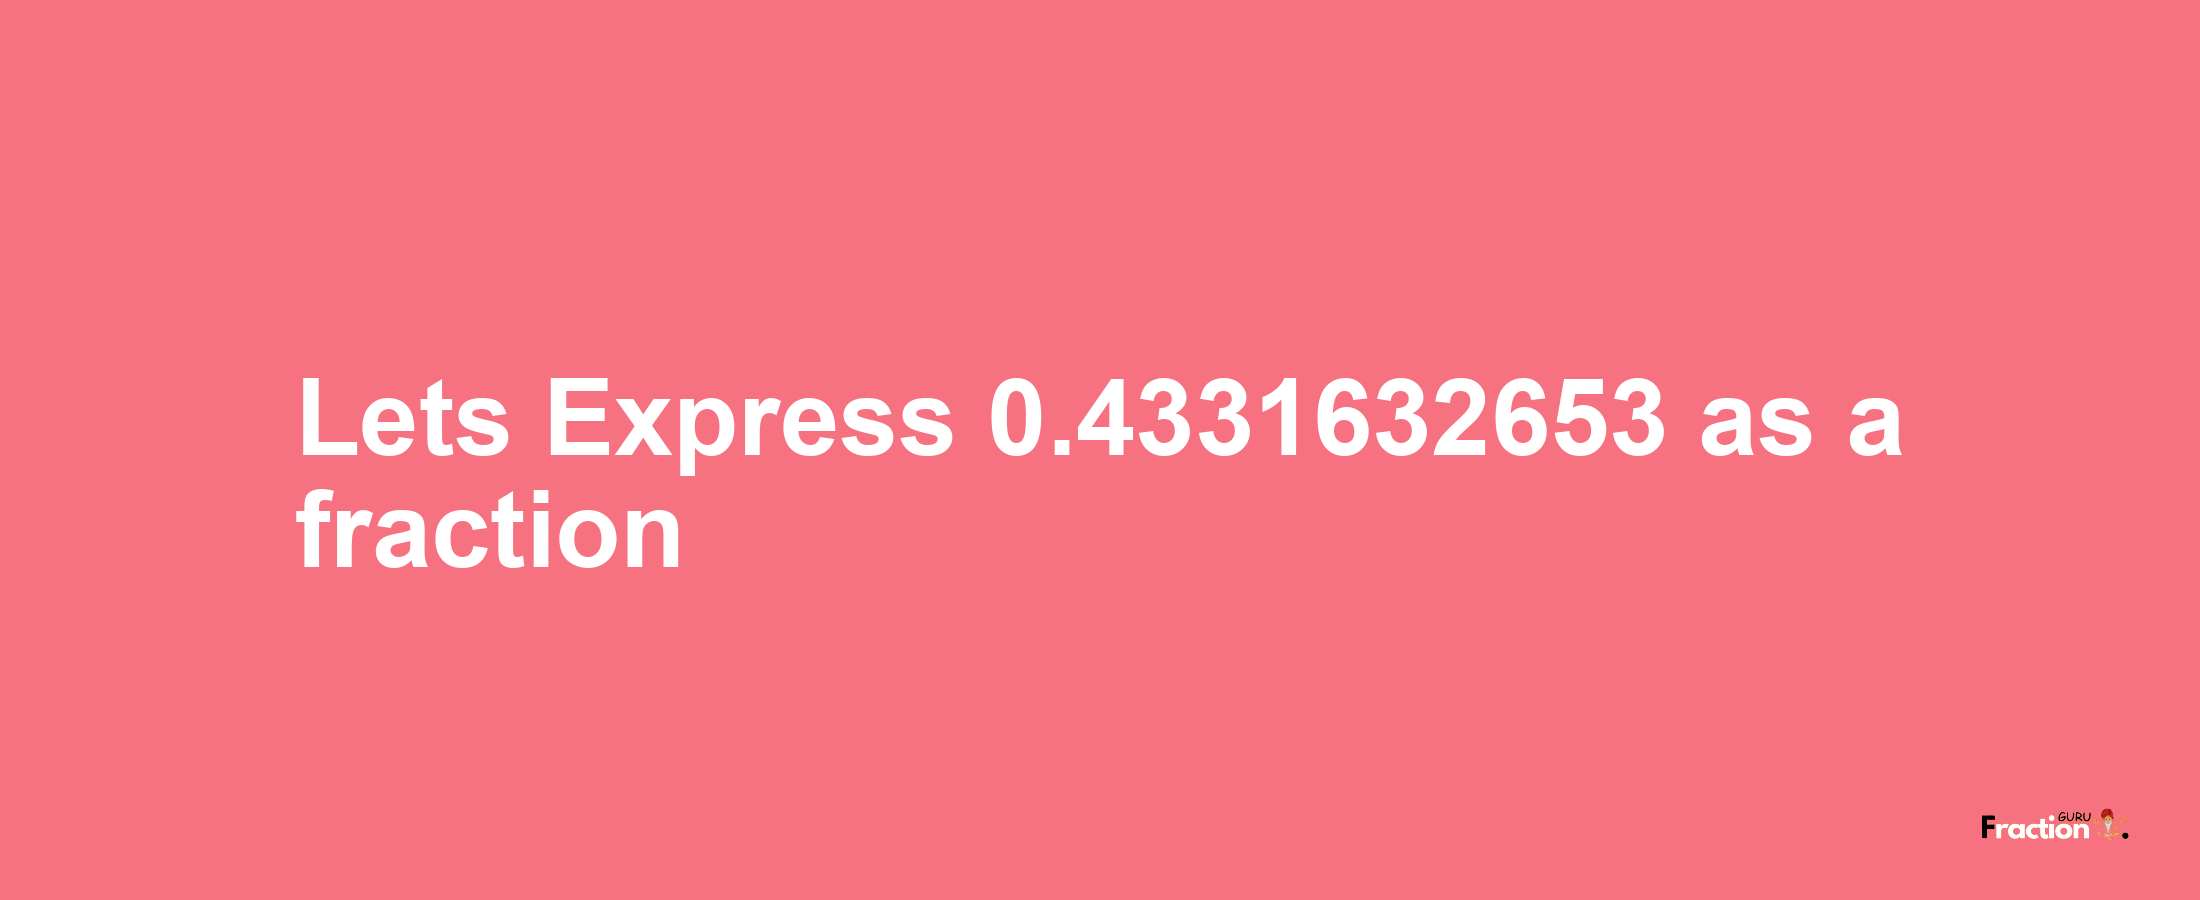 Lets Express 0.4331632653 as afraction